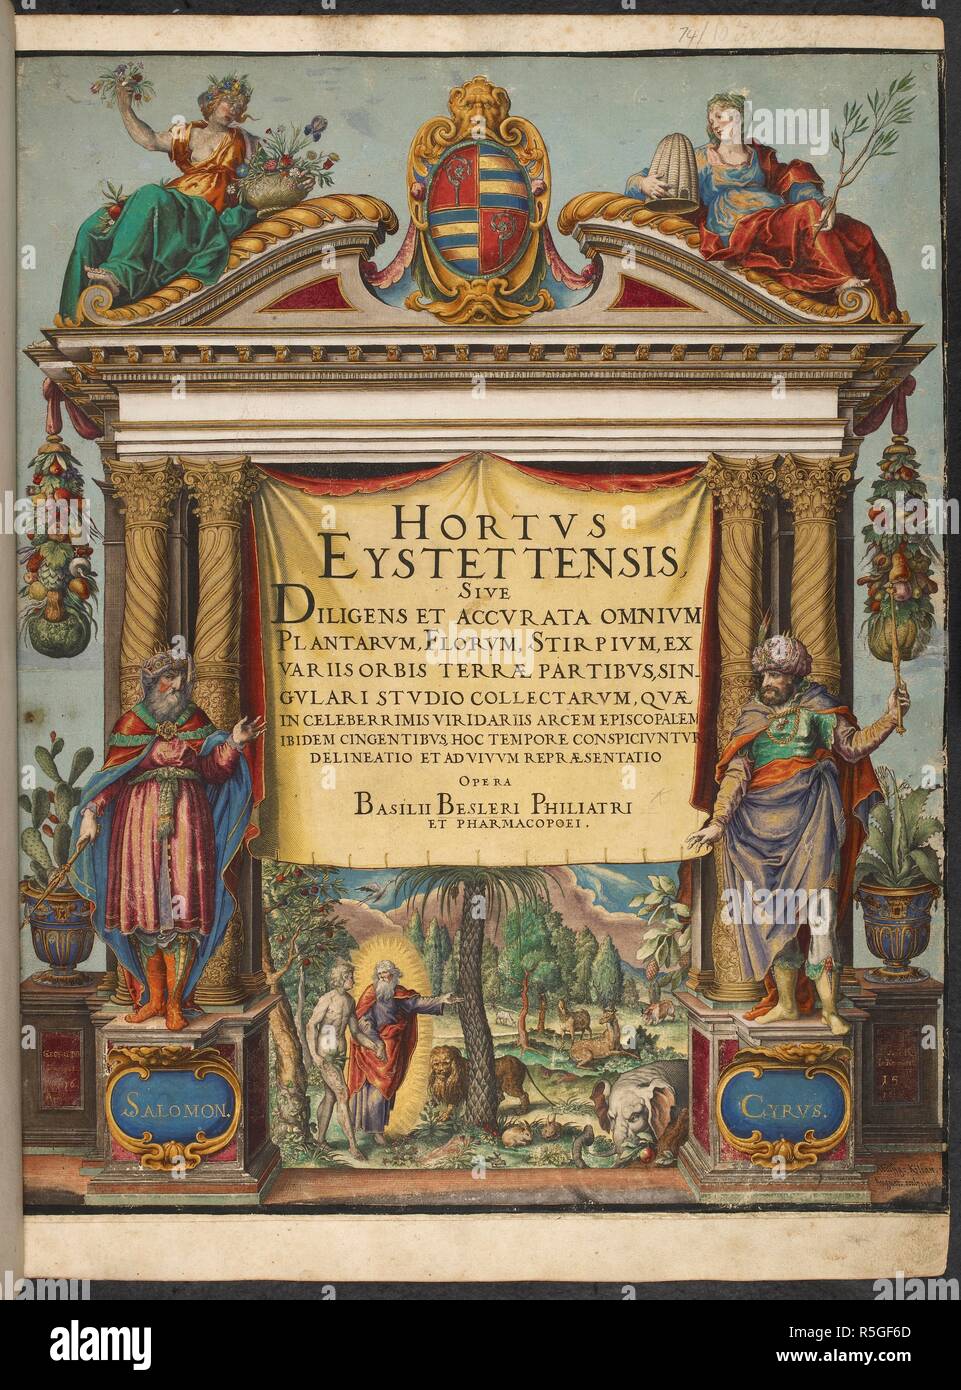 Title page. Hortus Eystettensis. George Mack, Nuremberg, 1613. Title page of Hortus Eystettensis.  Image taken from Hortus Eystettensis.  Originally published/produced in George Mack, Nuremberg, 1613. . Source: 10.Tab.29, title page. Stock Photo